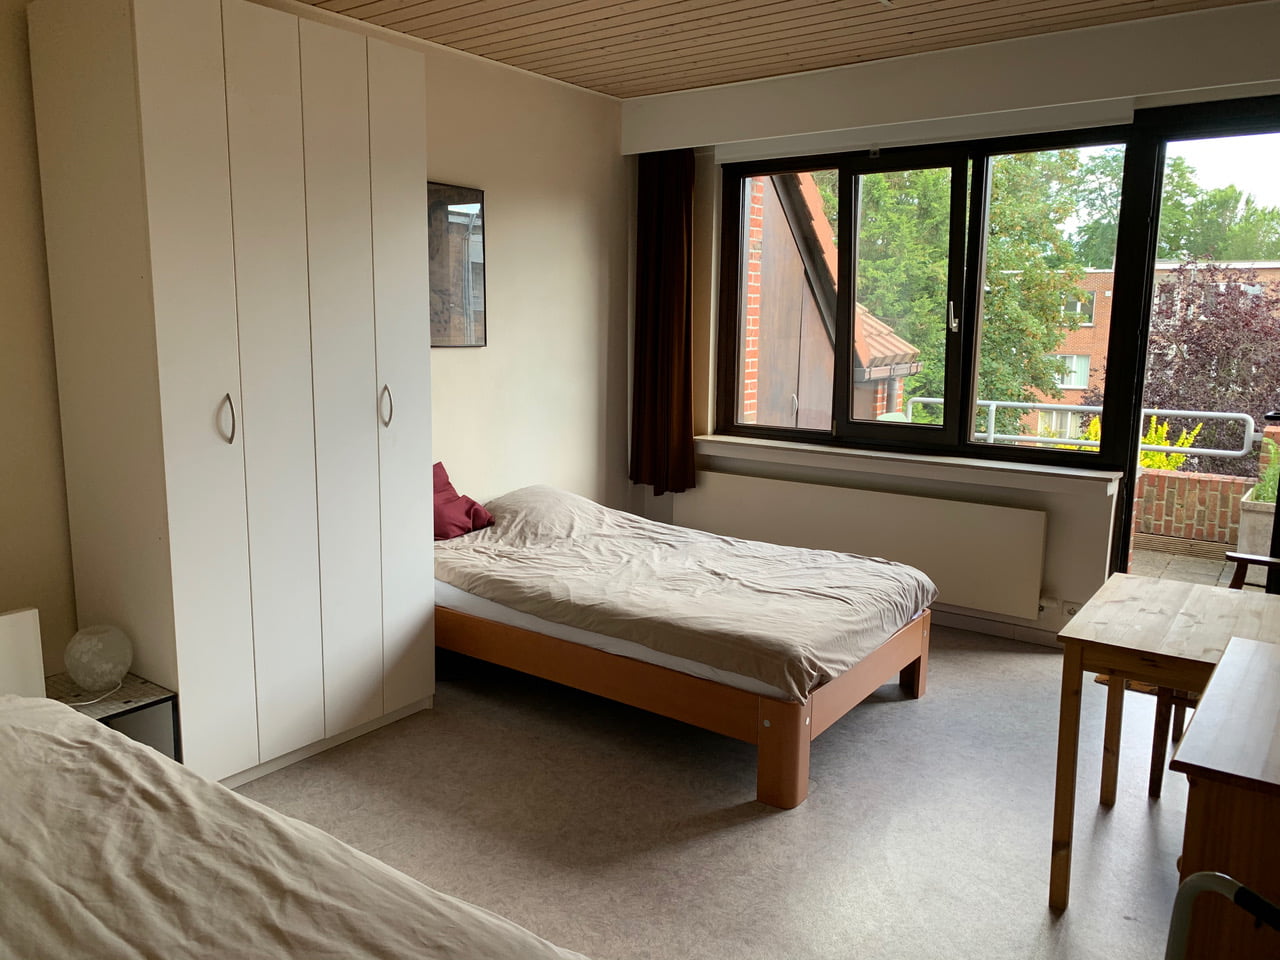 Mastvest - Professional accommodation in Antwerp South